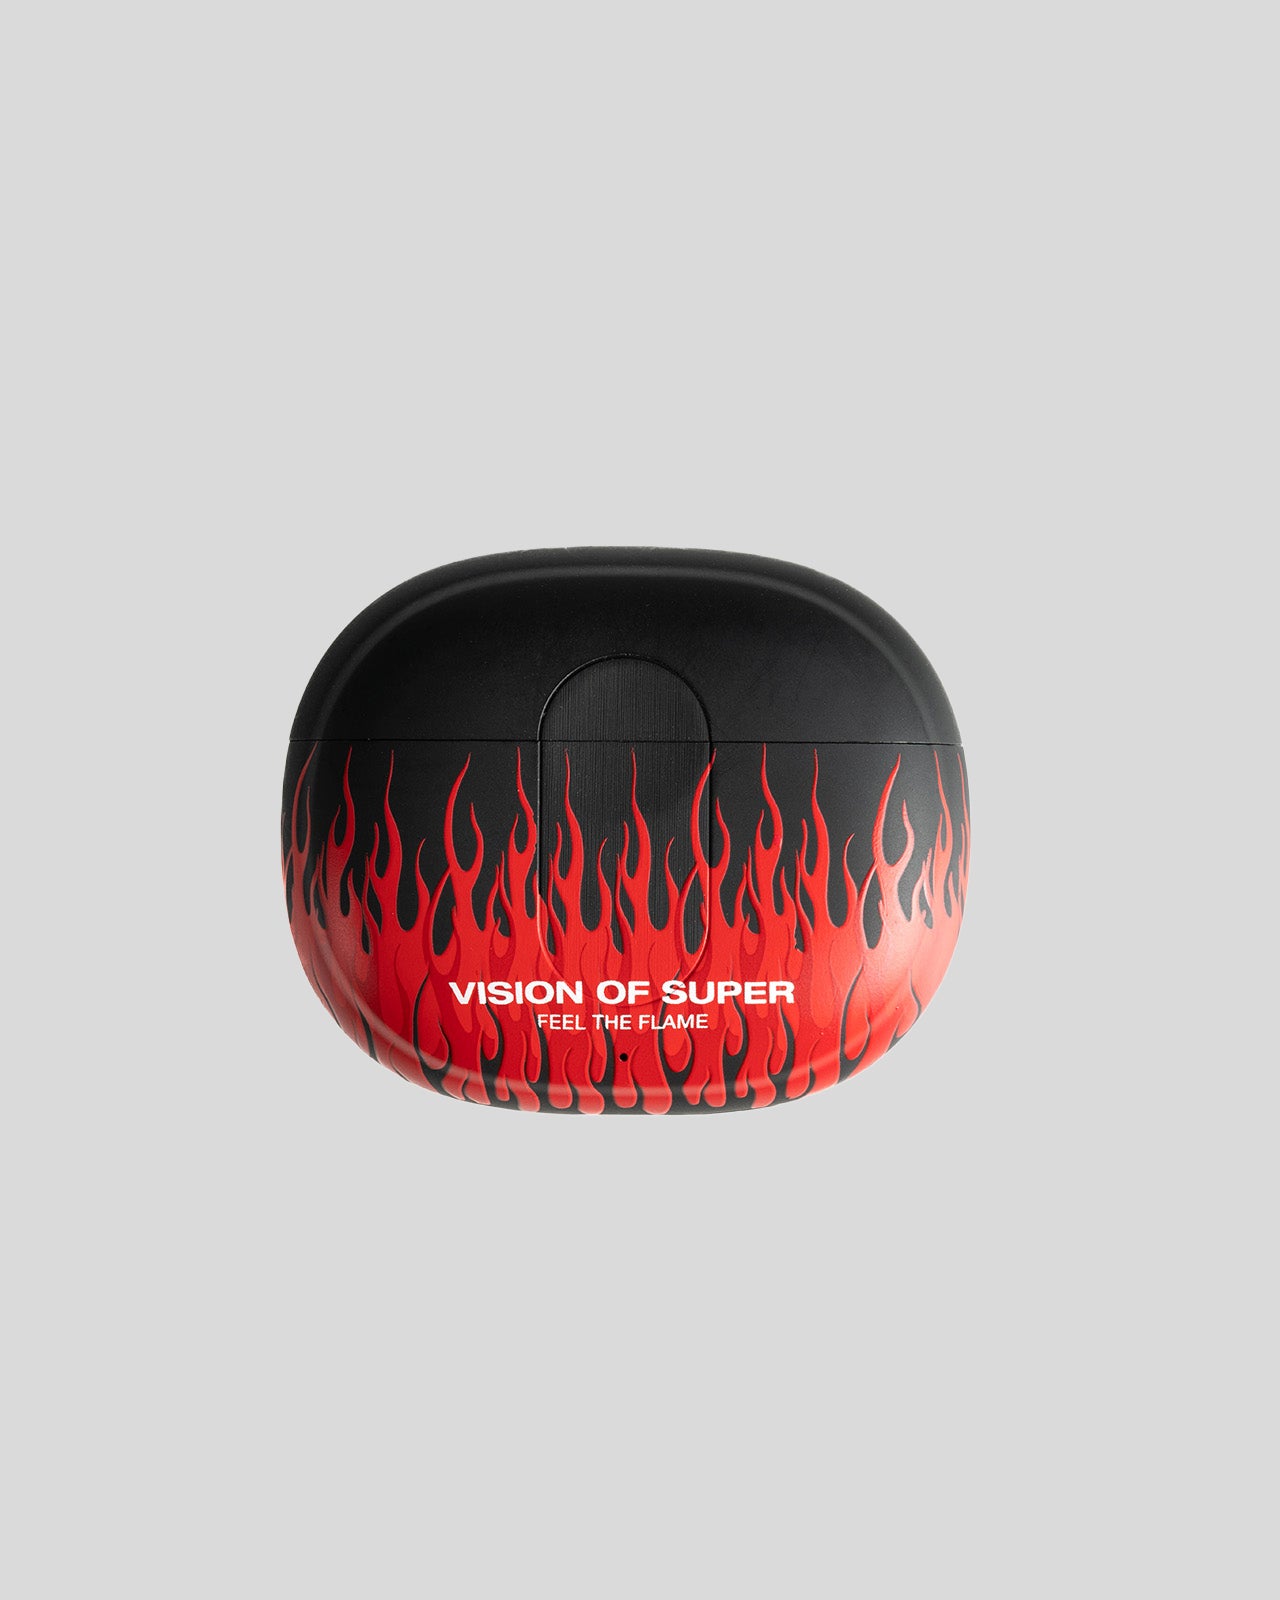 BLACK EARPHONES WITH RED FLAMES AND WHITE LOGO